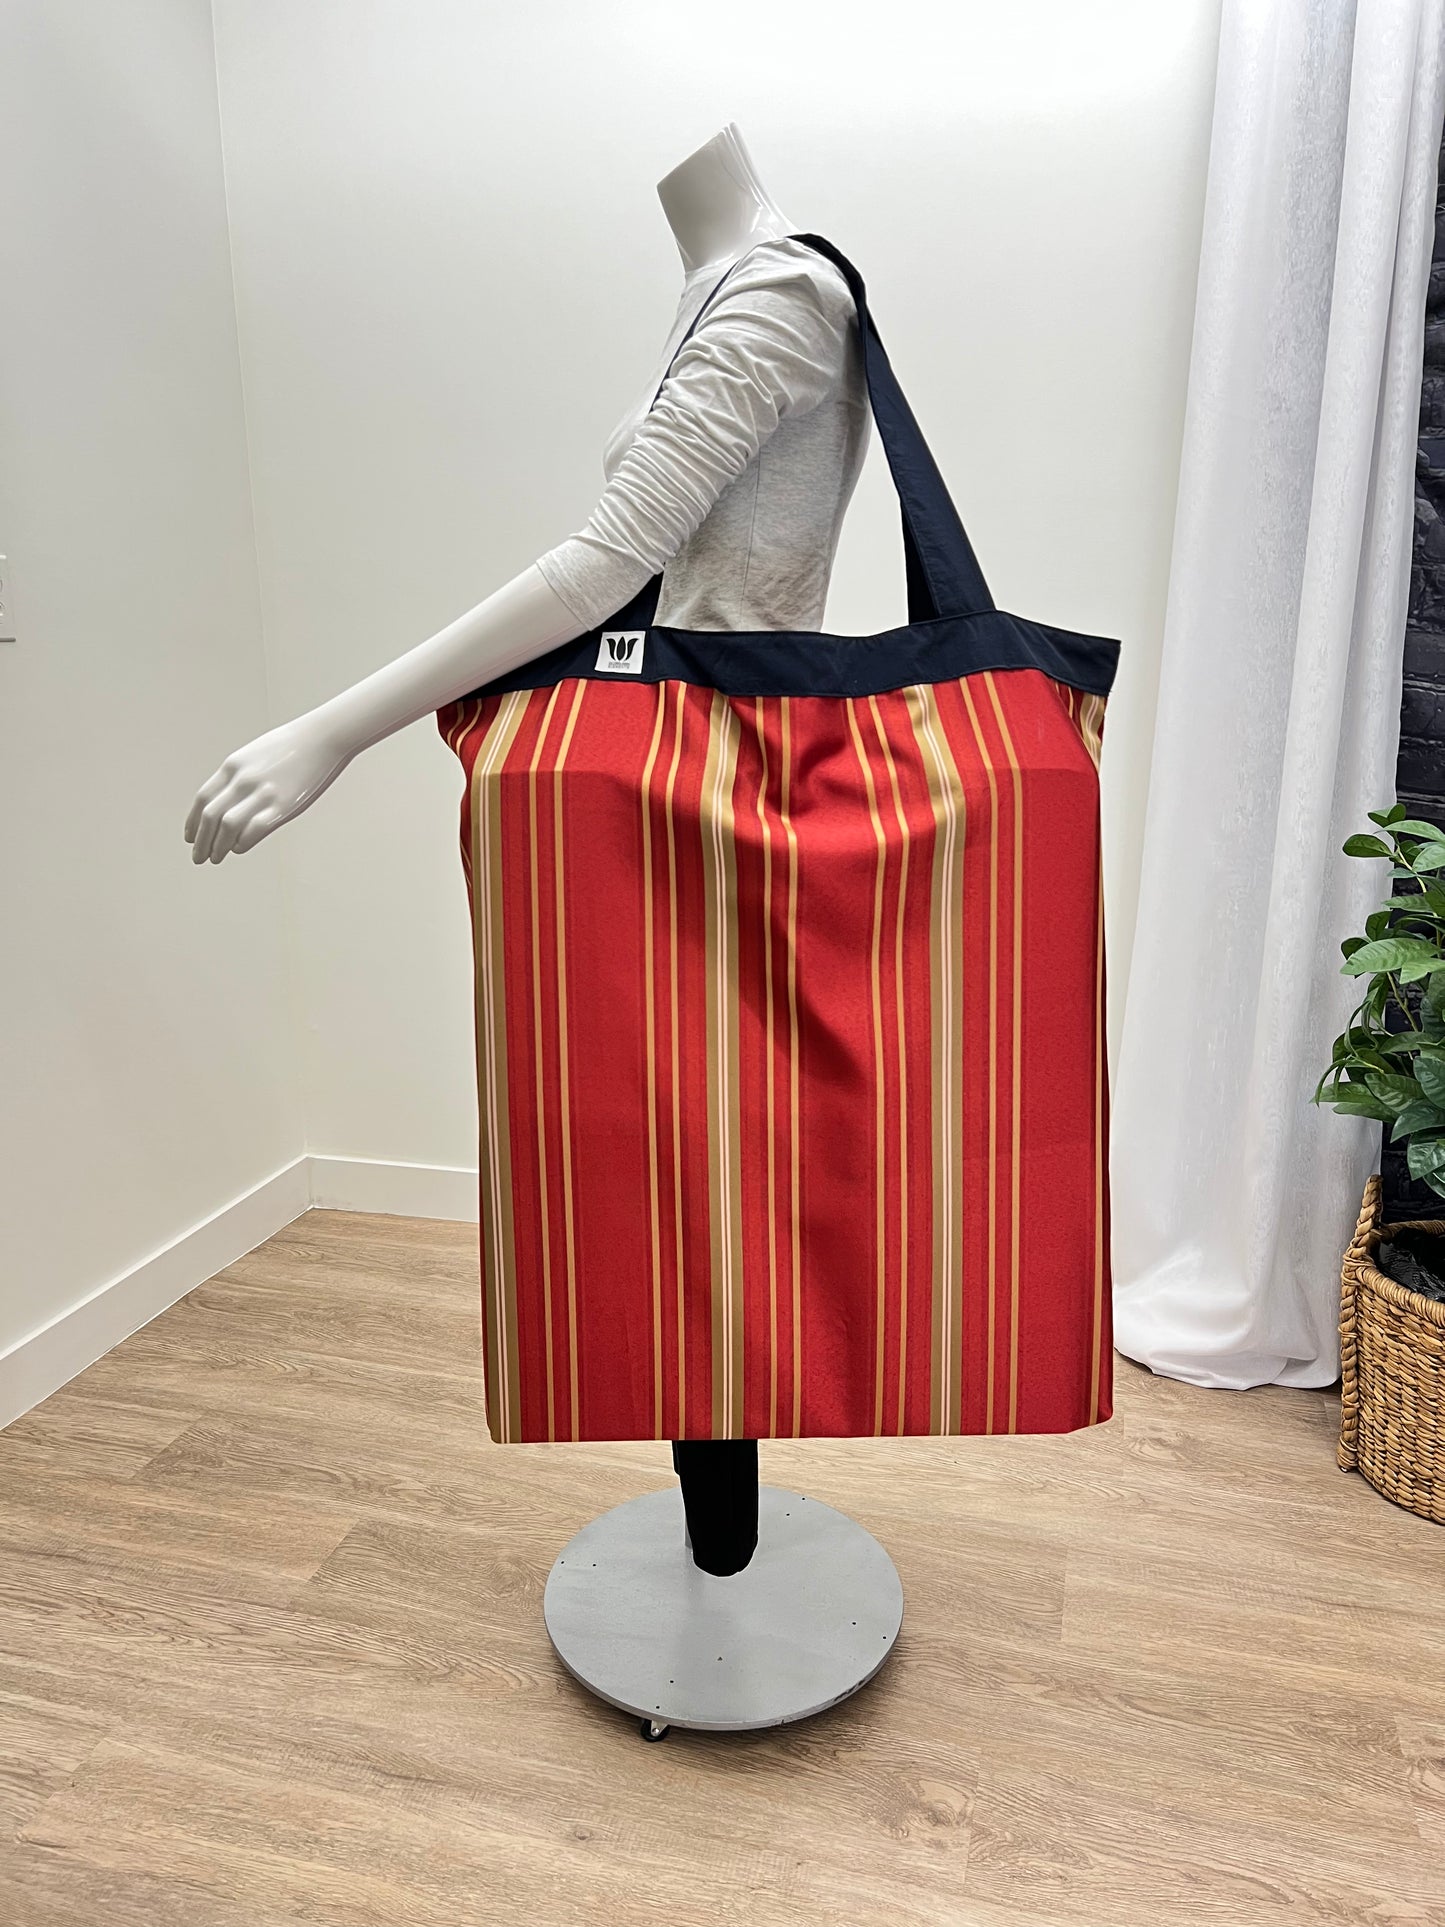 Extra large yoga mat bag to carry all your additional support props. red gold stripe print. Made in Canada by My Yoga Room Elements